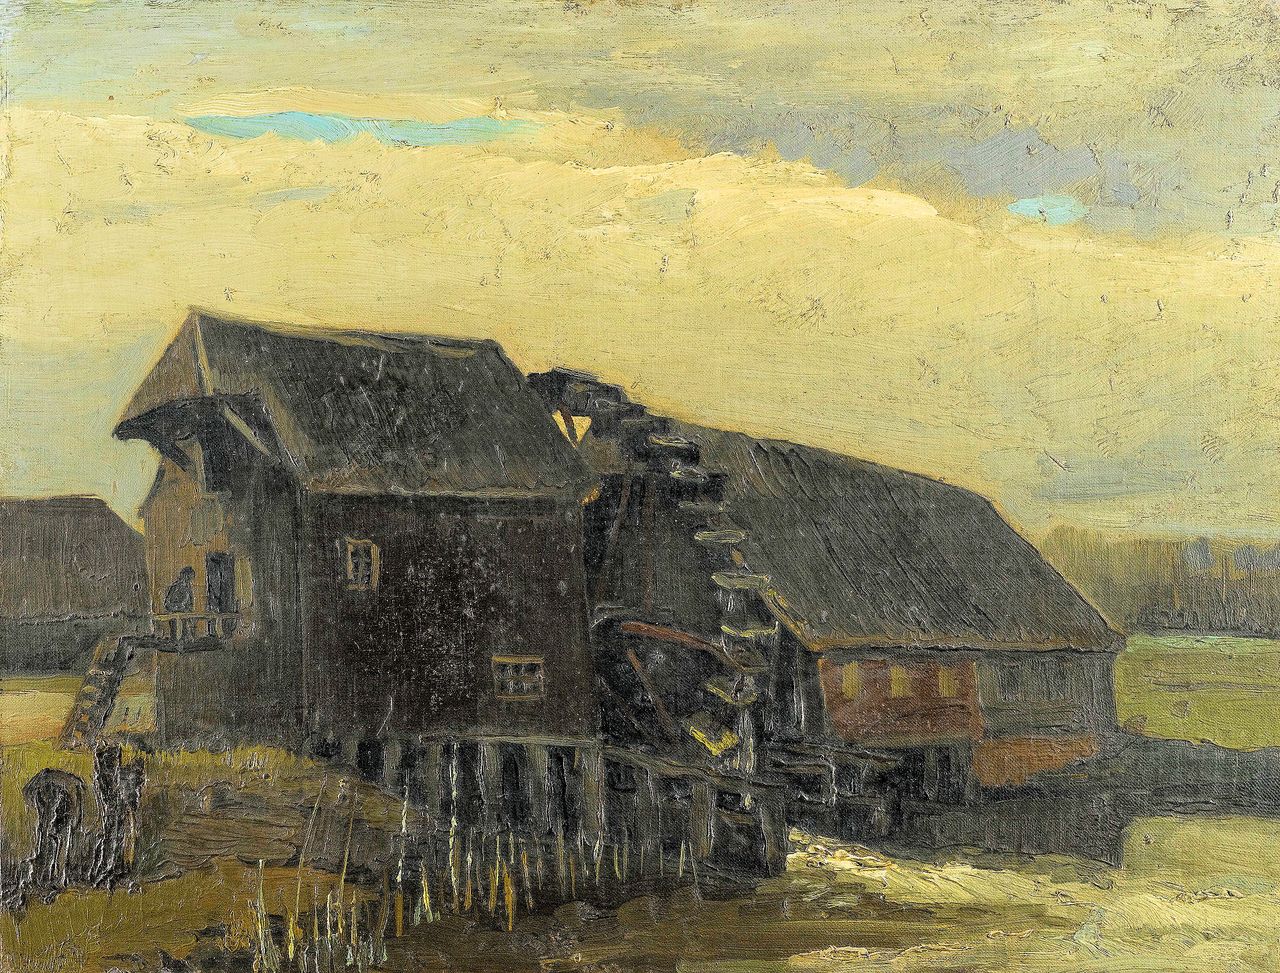 Watermill at Opwetten, Vincent van Gogh (1853-1890), Nuenen 1884, Private Collection